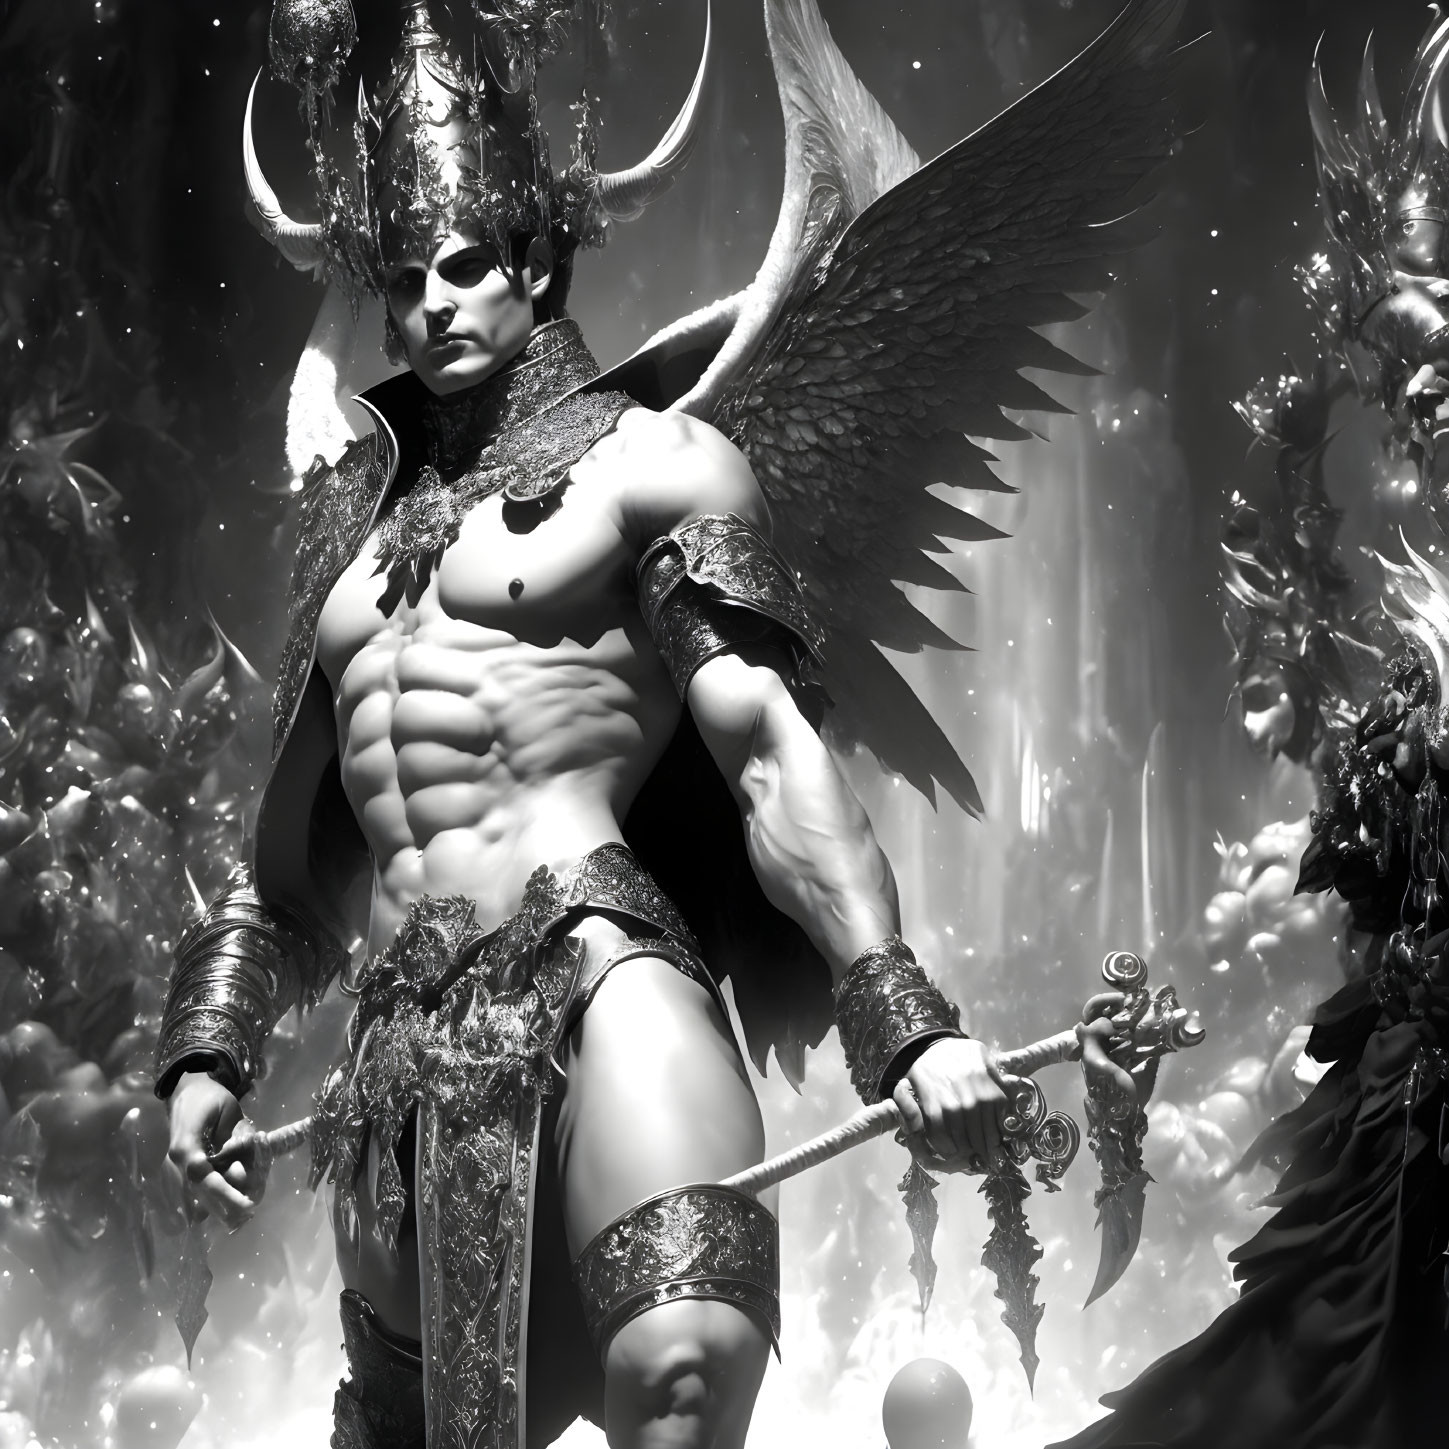 Monochrome fantasy character with wings, horns, and ornate armor in detailed setting